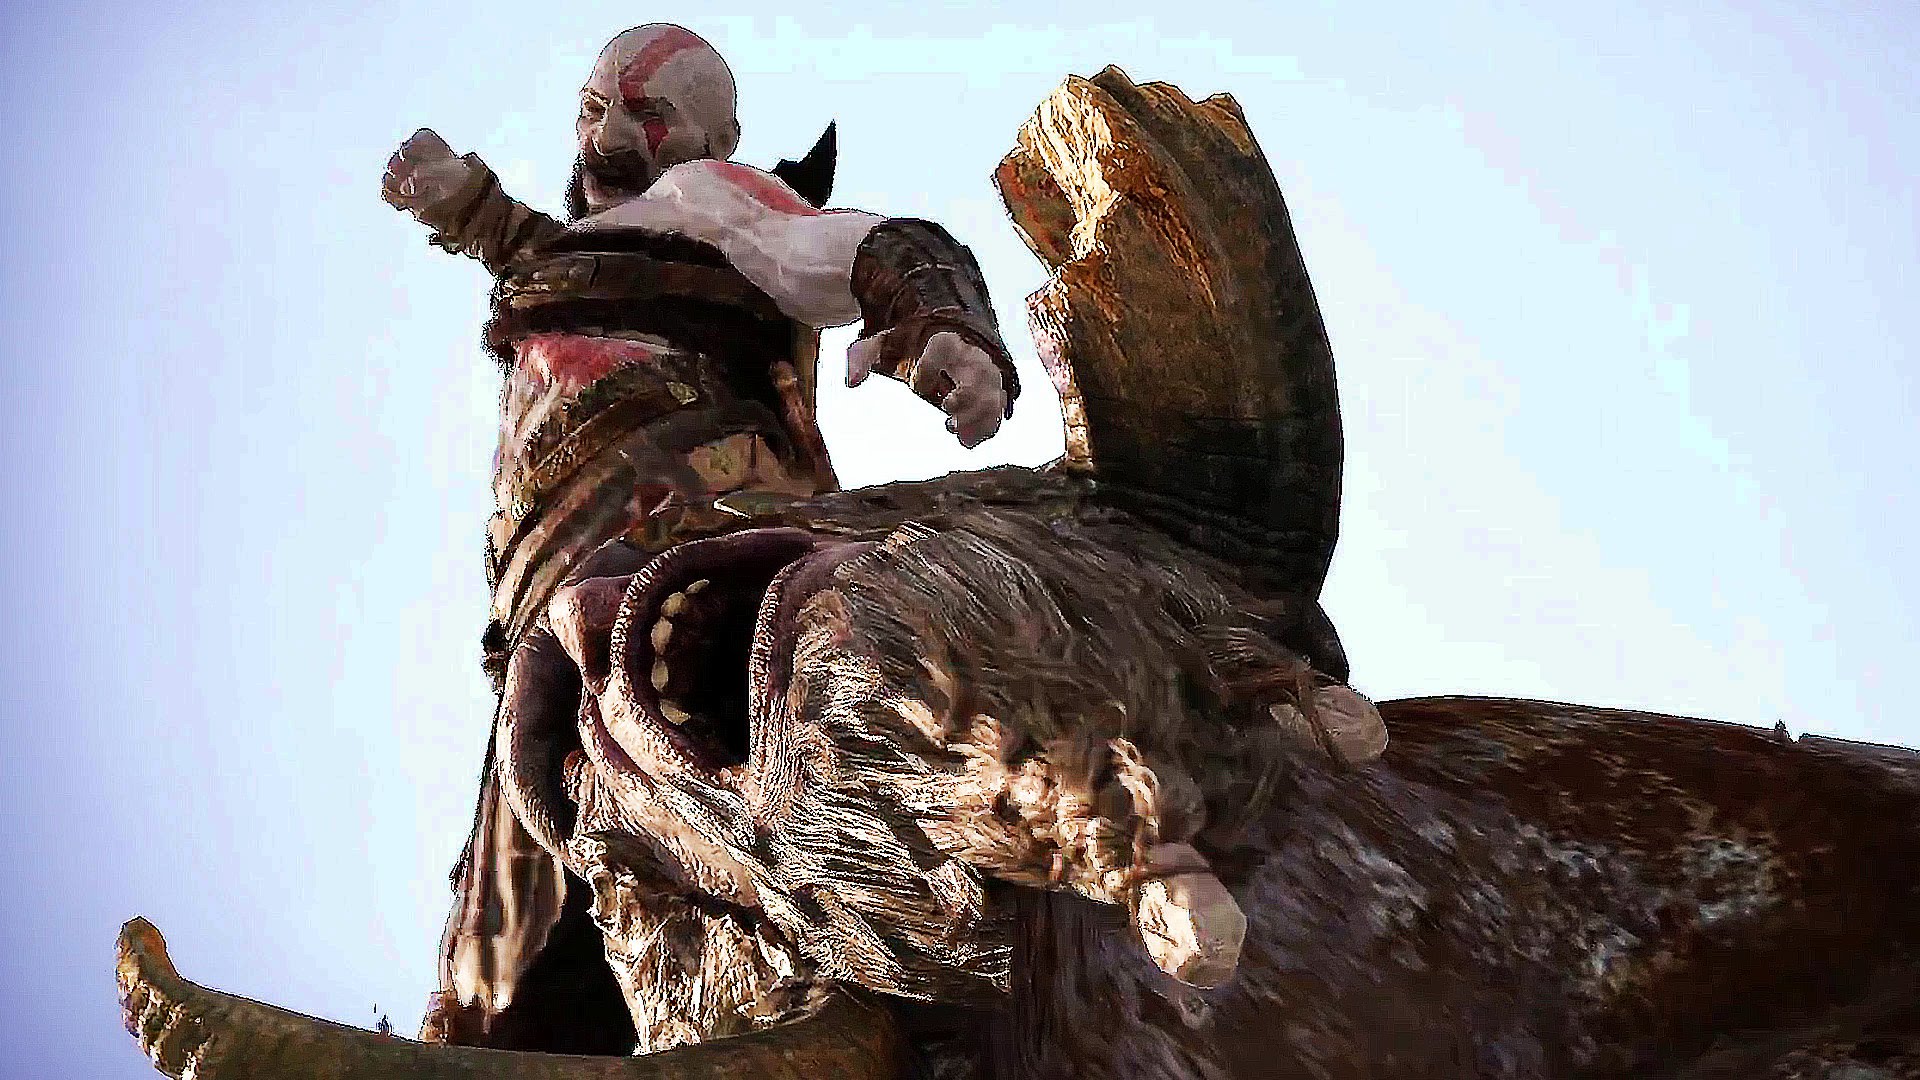 Kratos Attacks A Creature In God Of War Ps4 - God Of War 4 On Ps4 - HD Wallpaper 